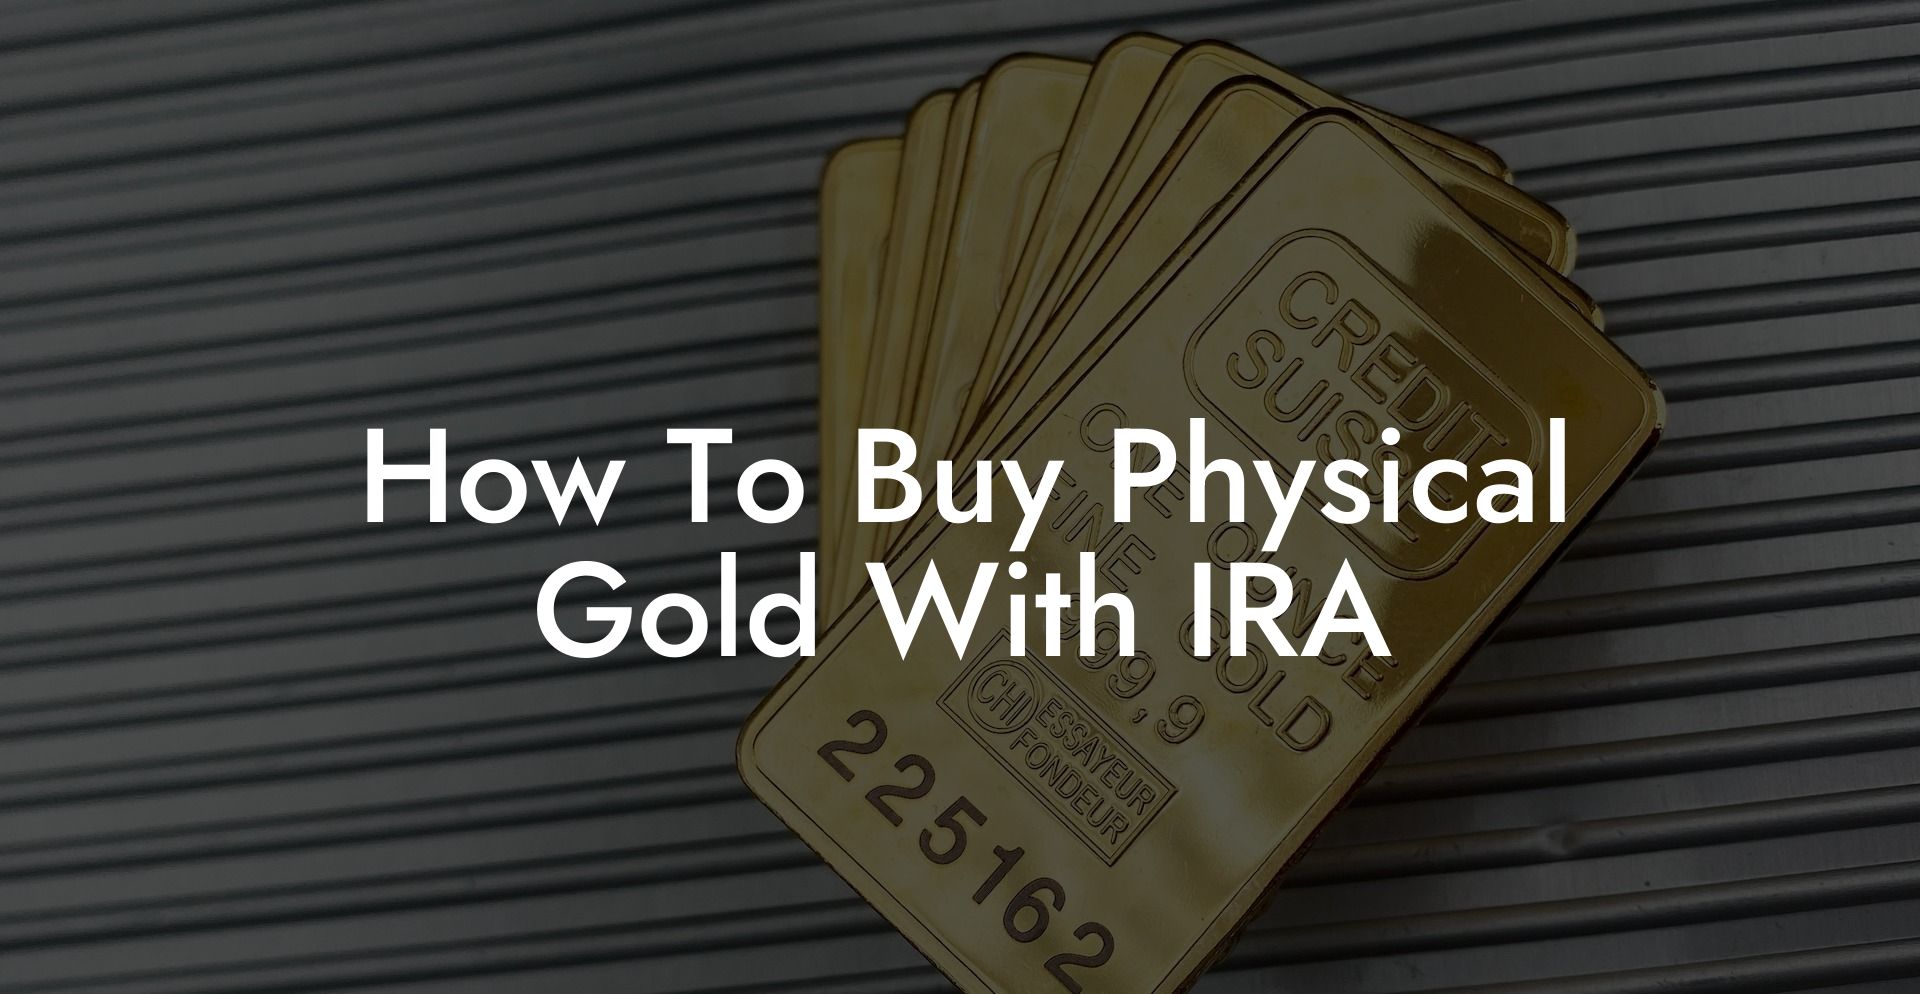 How To Buy Physical Gold With IRA